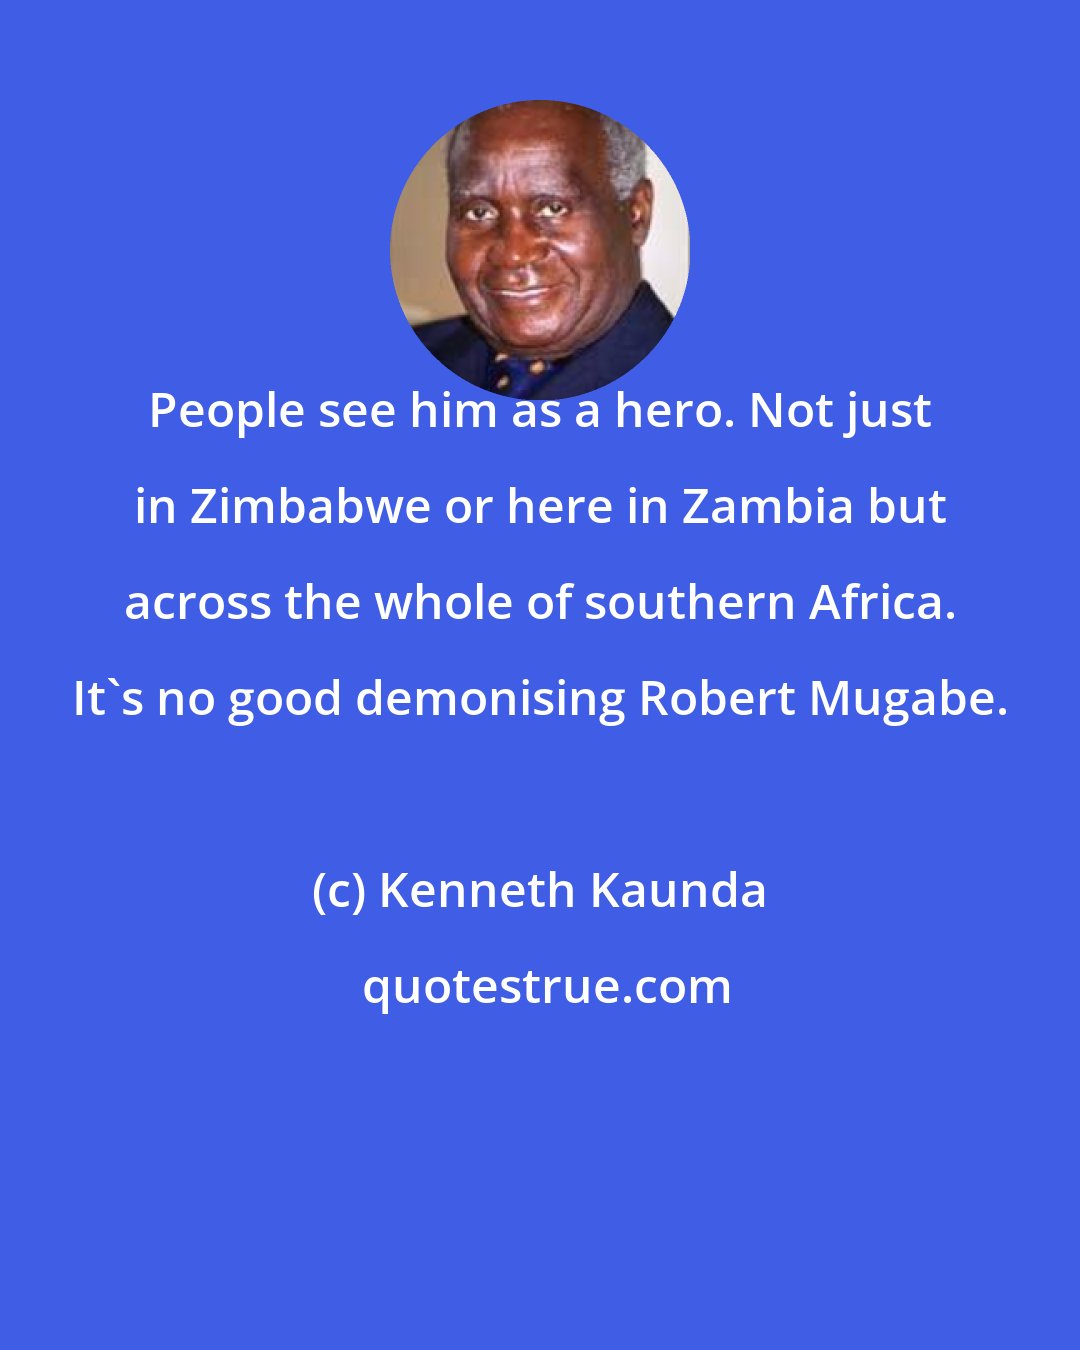 Kenneth Kaunda: People see him as a hero. Not just in Zimbabwe or here in Zambia but across the whole of southern Africa. It's no good demonising Robert Mugabe.